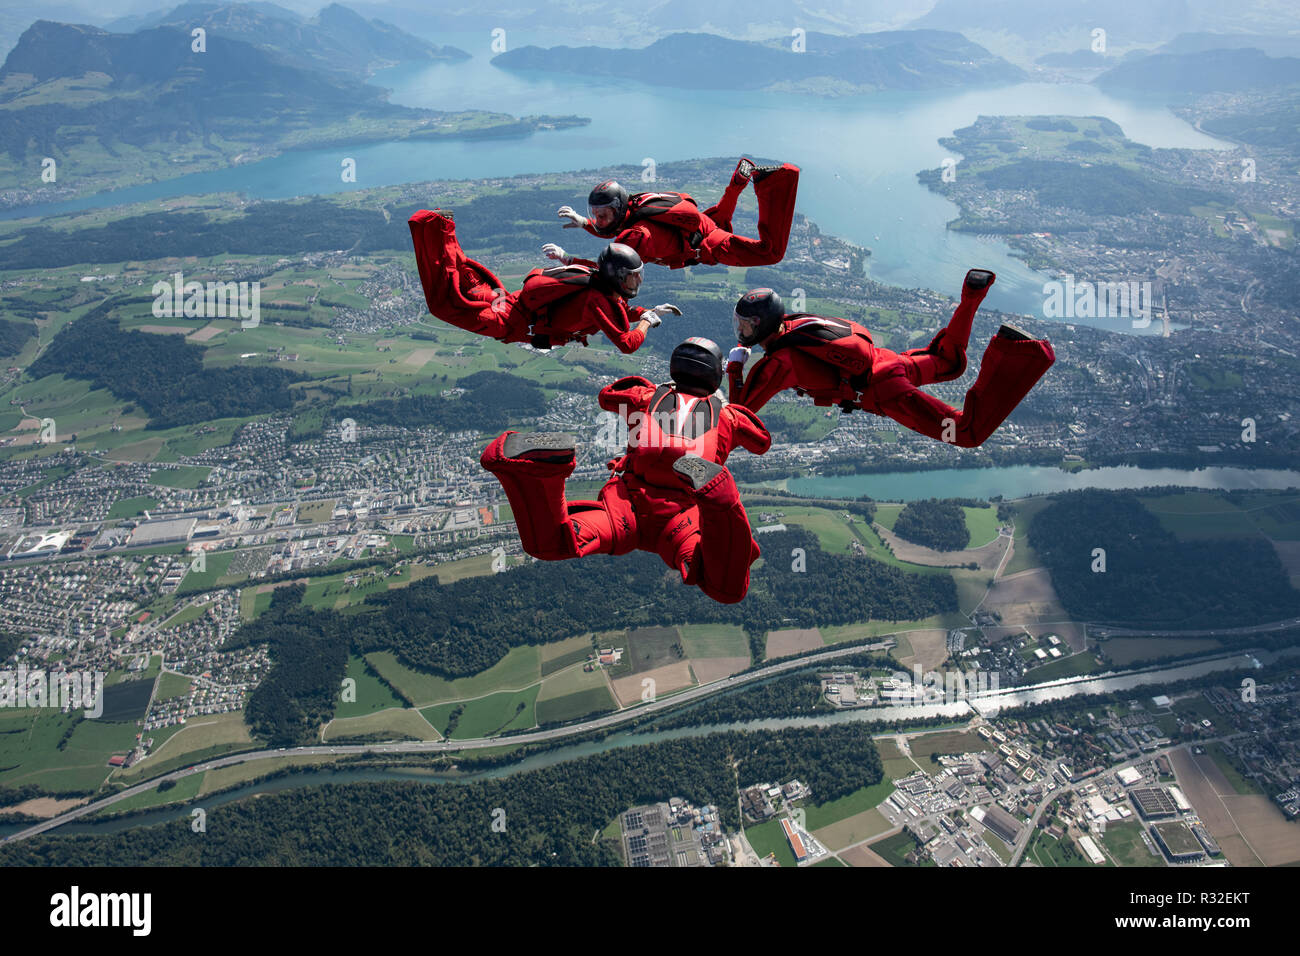 Skydiving team training in the skies above the Lucerne area Stock Photo